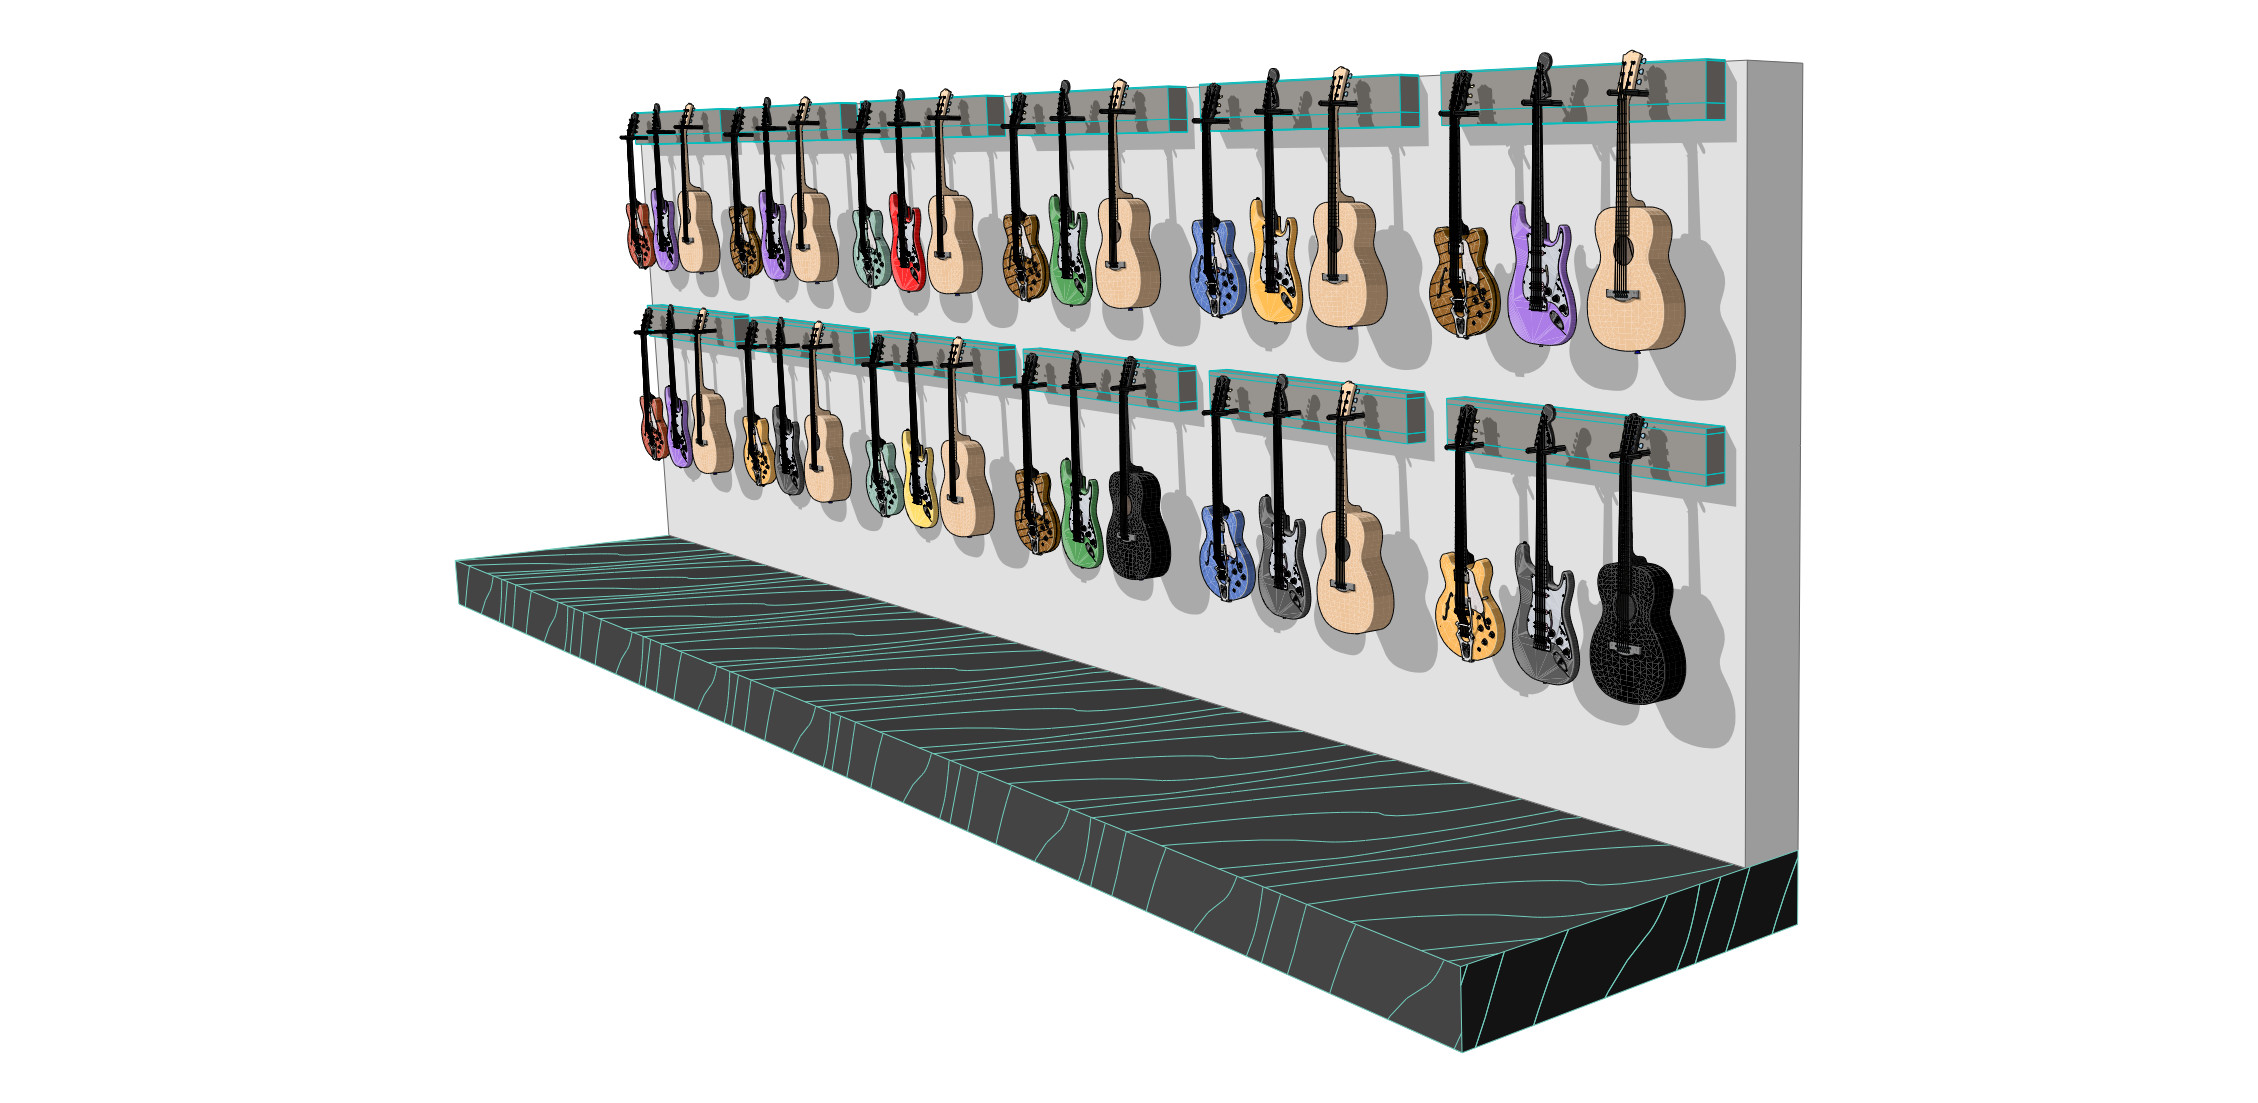 Here is a vectorial PDF exported perspective view of a wall of these converted guitars hung.